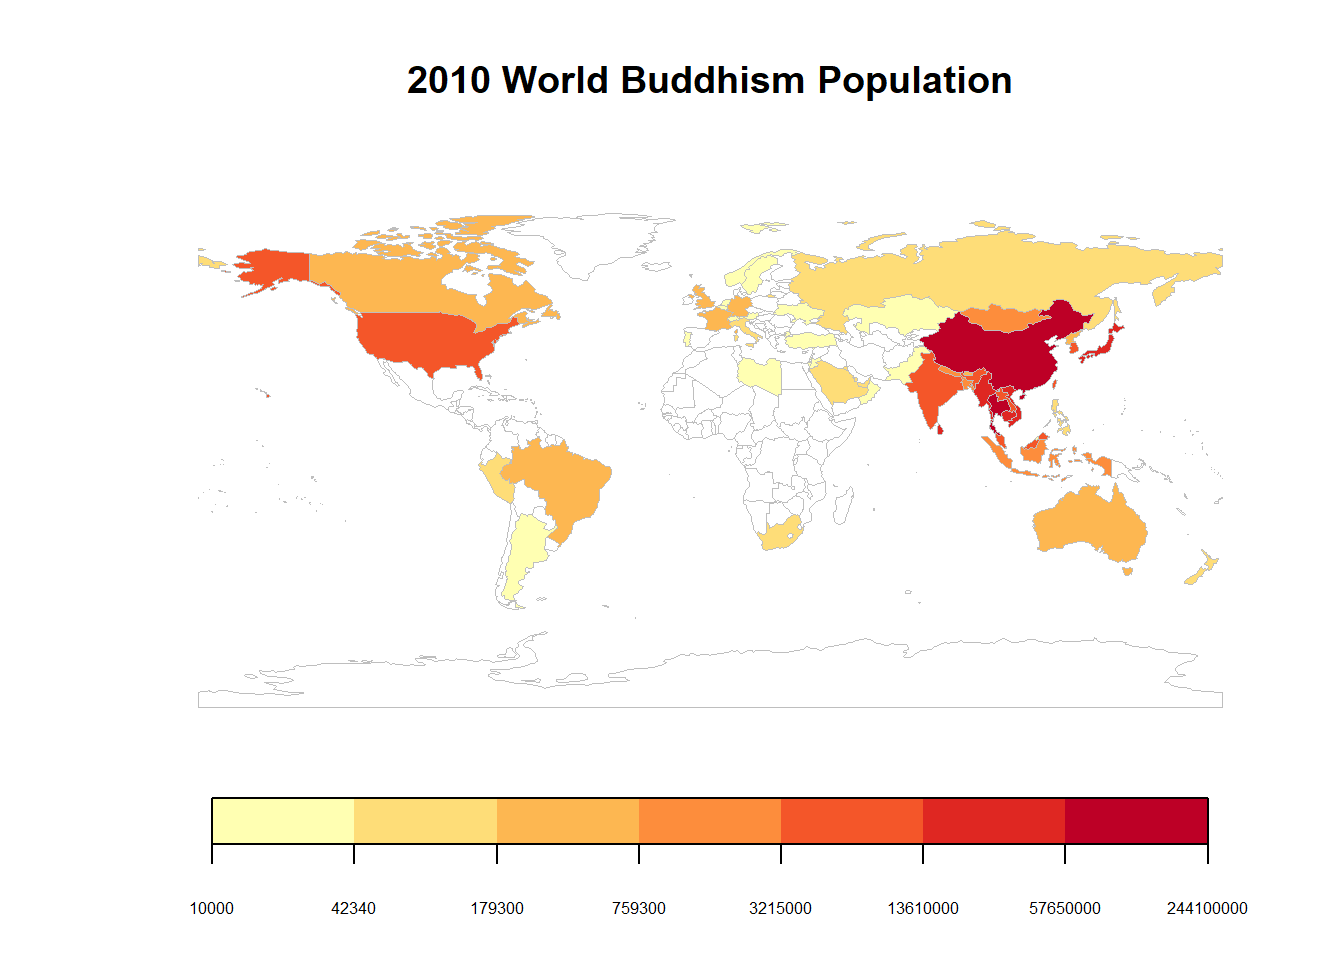 Country Heat Map of Buddhism Population in 2010